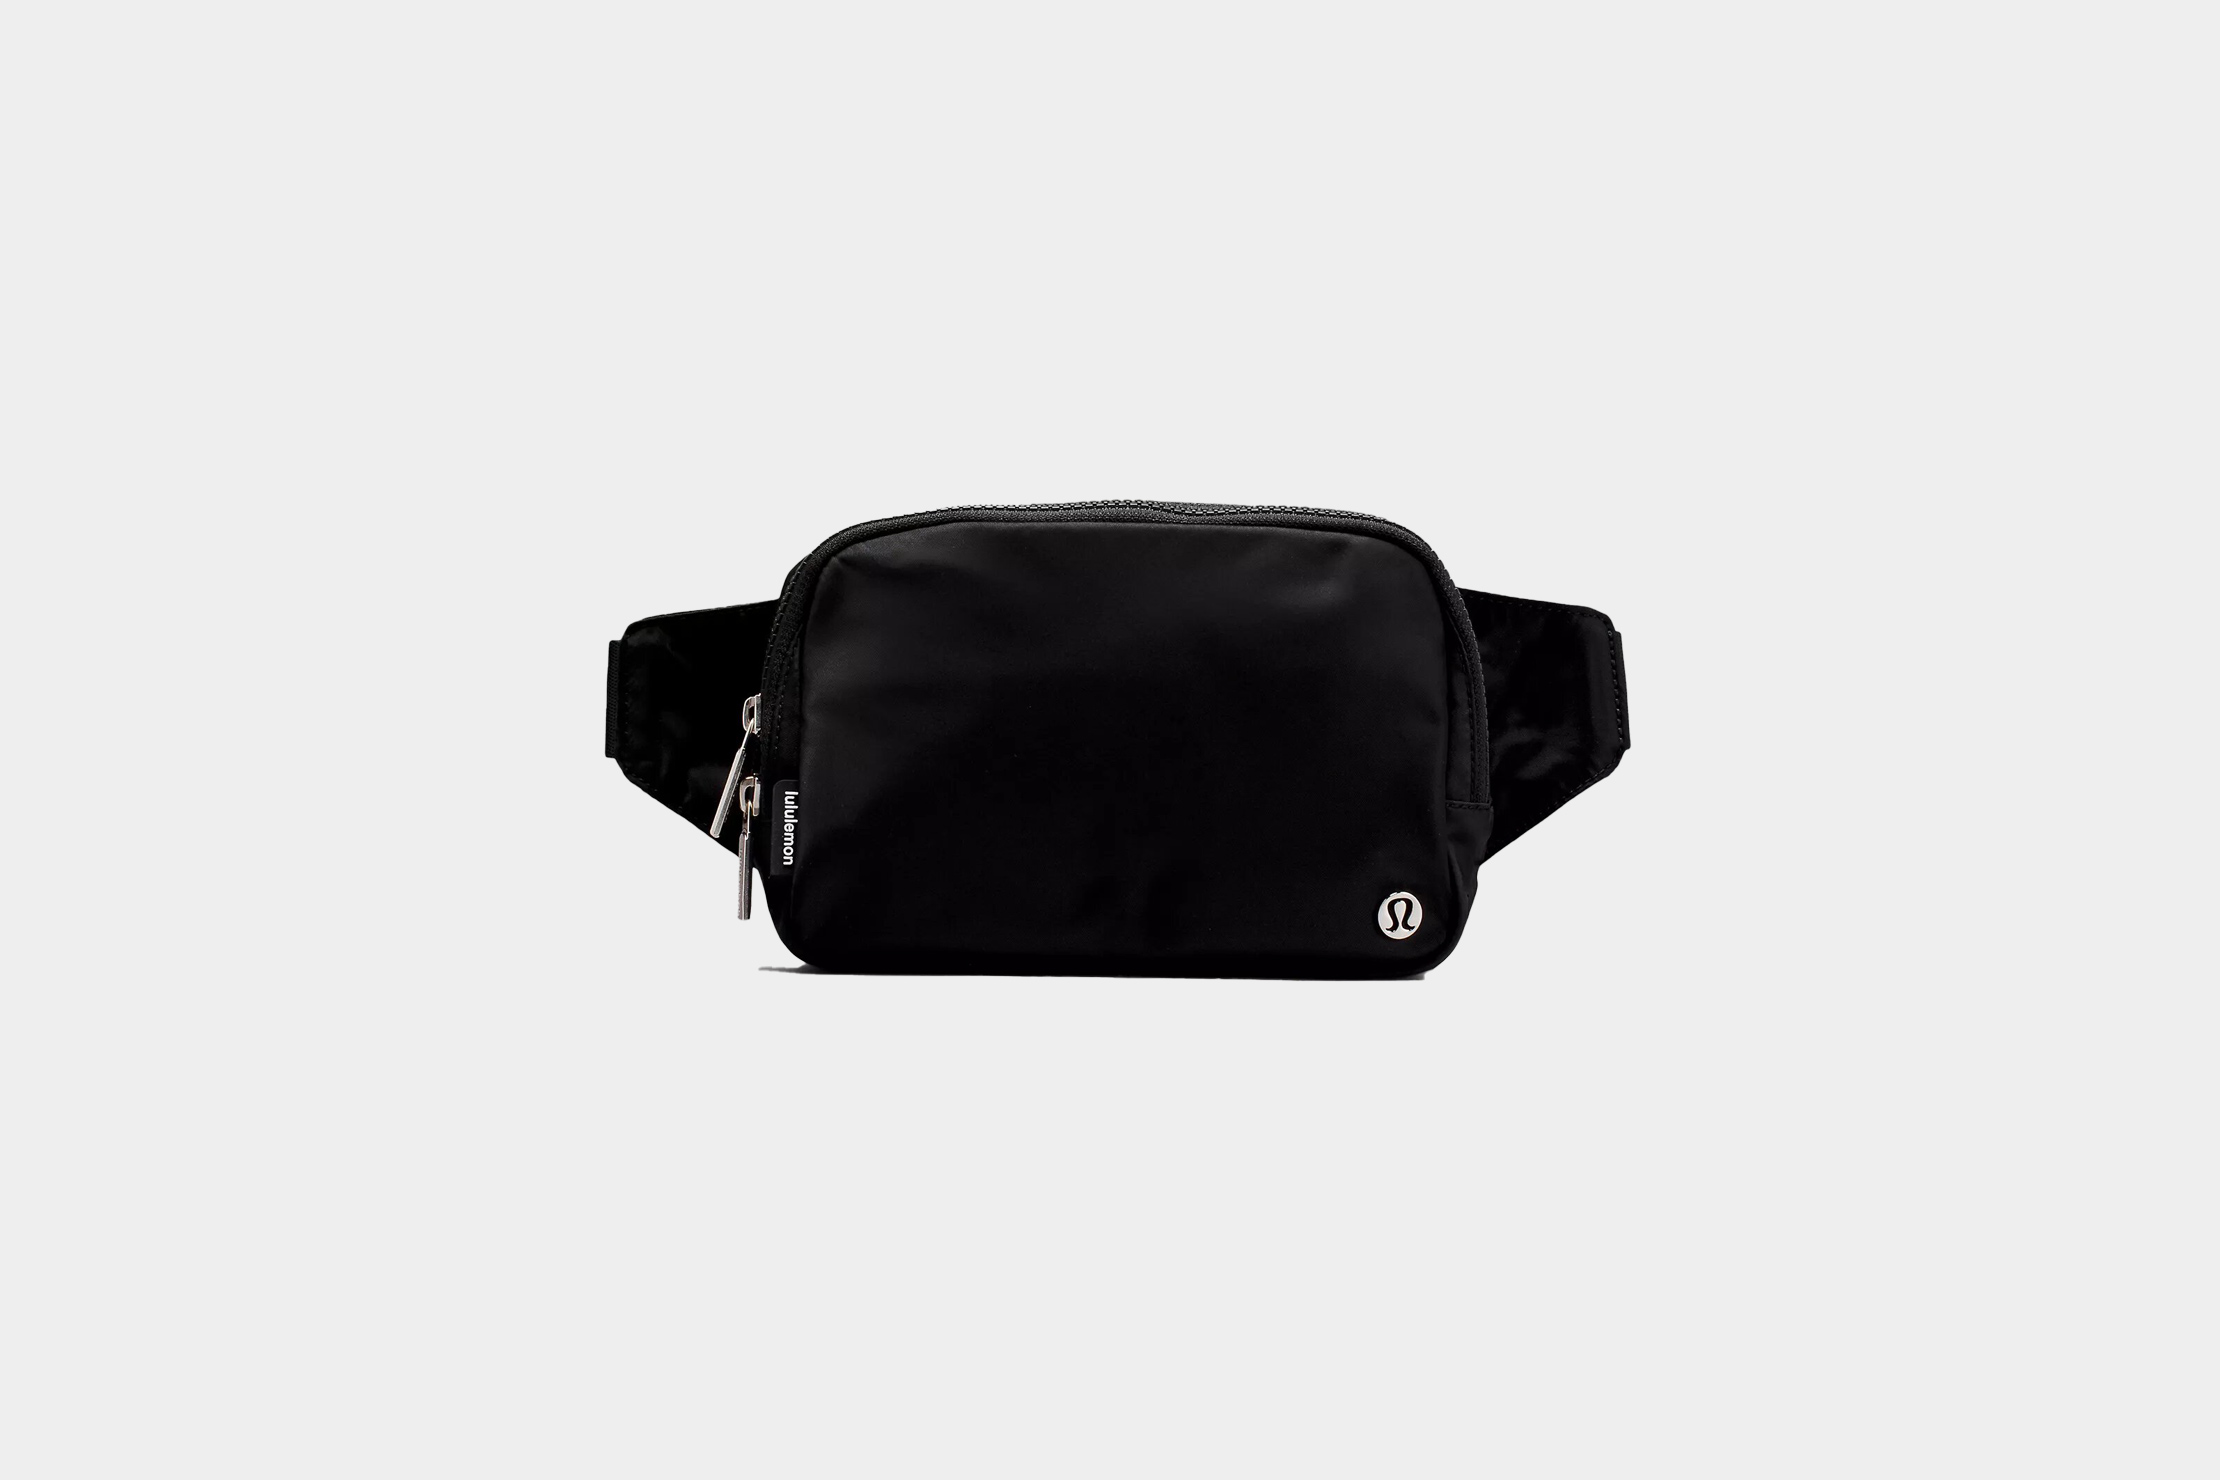 UPDATED REVIEW: LULULEMON EVERYWHERE BELT BAG IN LARGE .. IS IT